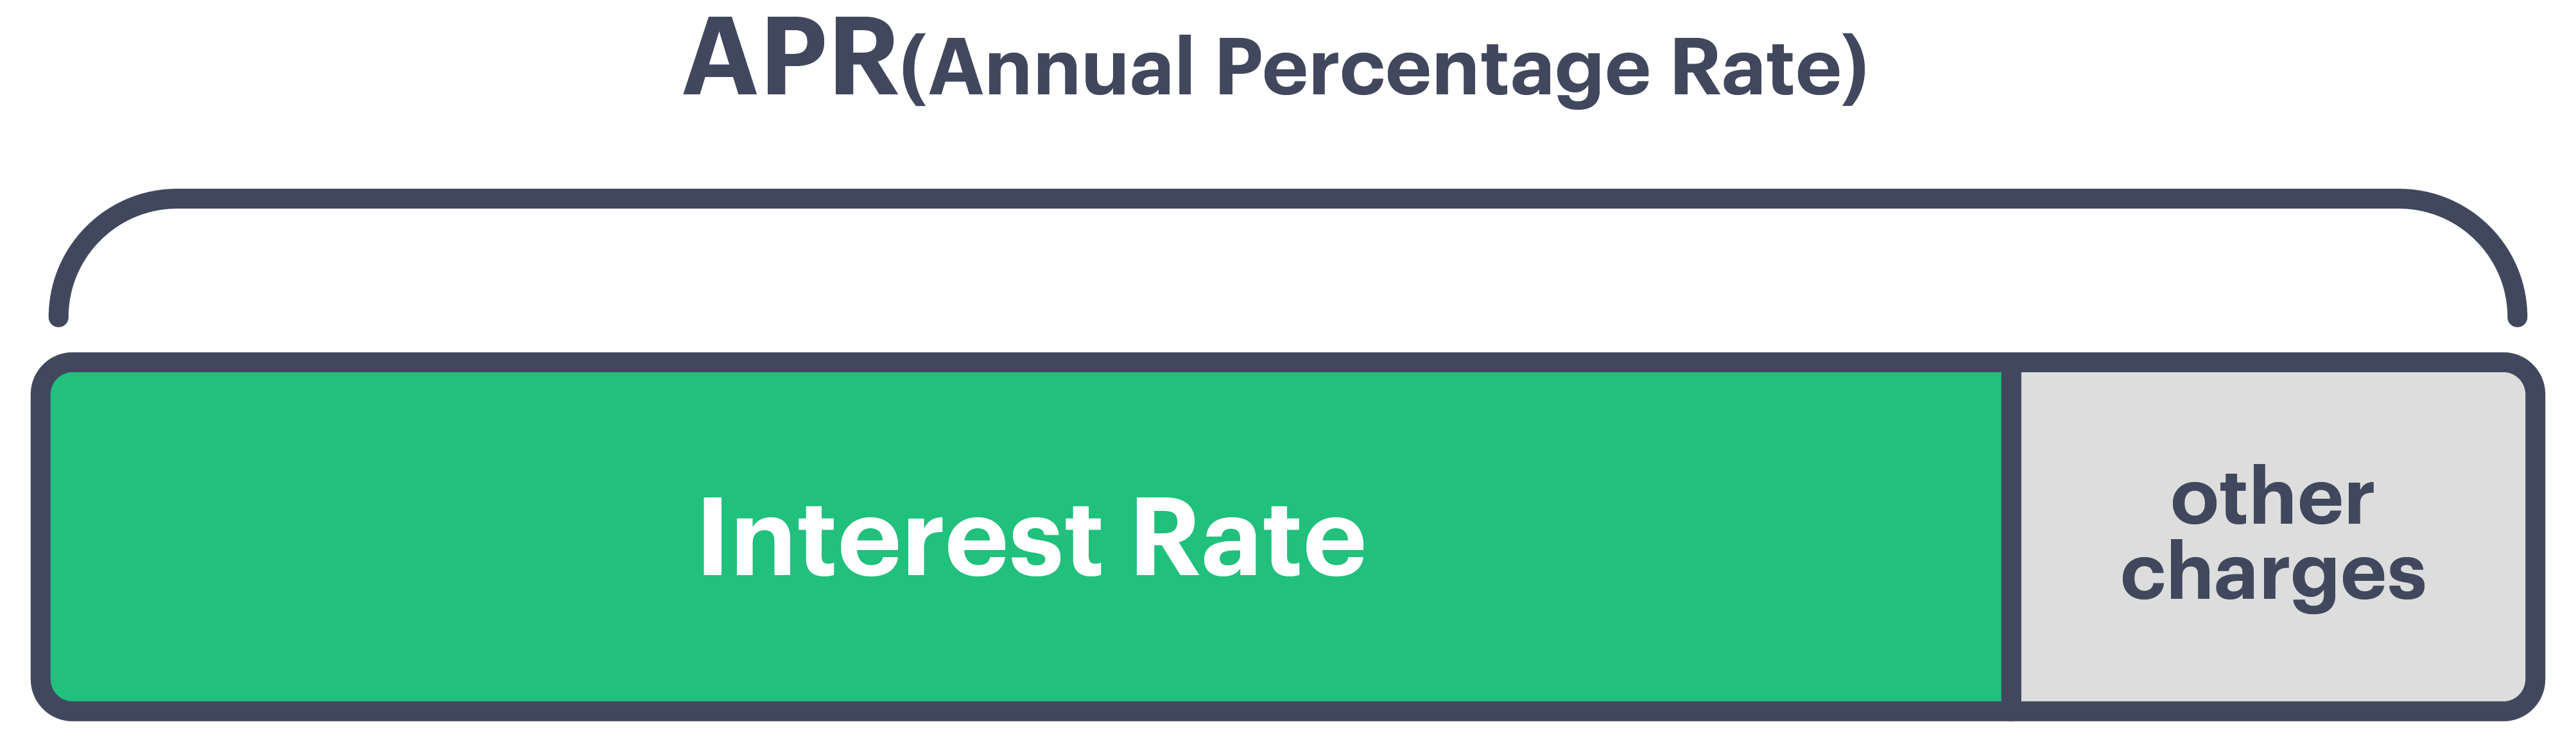 apr-vs-interest-rate-know-the-difference-when-choosing-a-personal-loan